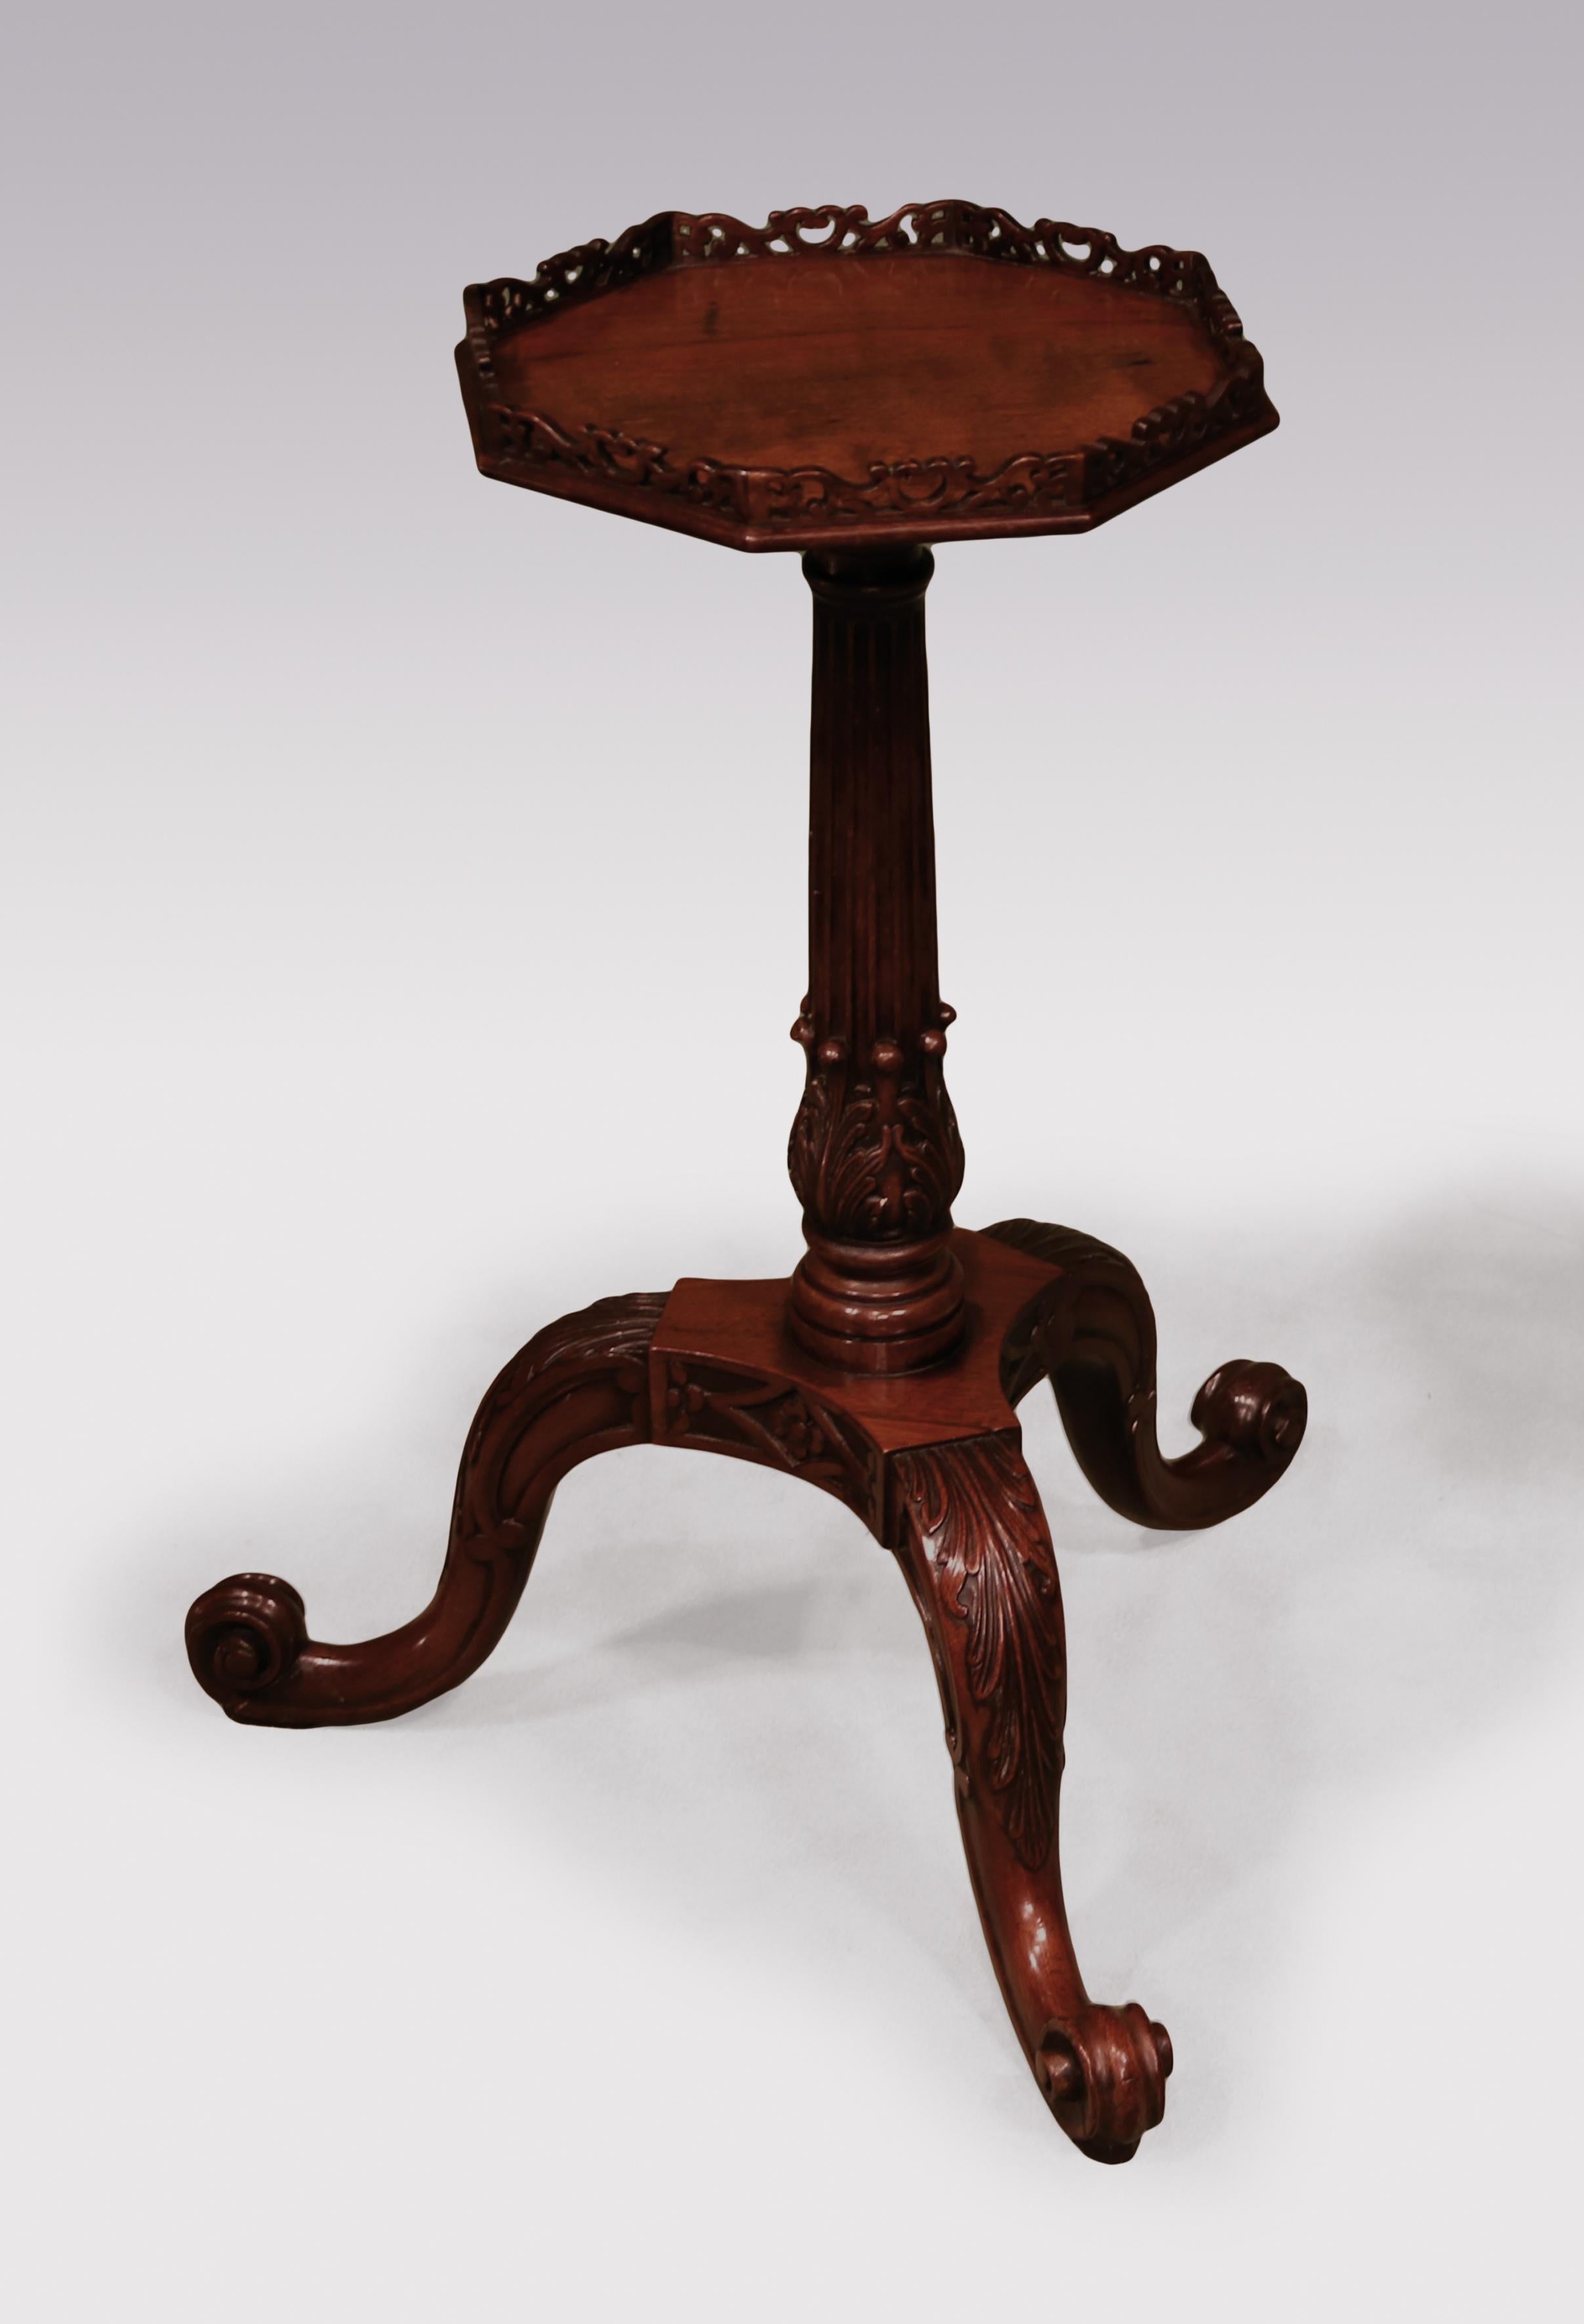 A fine mid-18th century Chippendale period mahogany kettle stand, having pierced galleried octagonal top, raised on acanthus carved fluted stem ending on acanthus carved scrolled tripod legs.